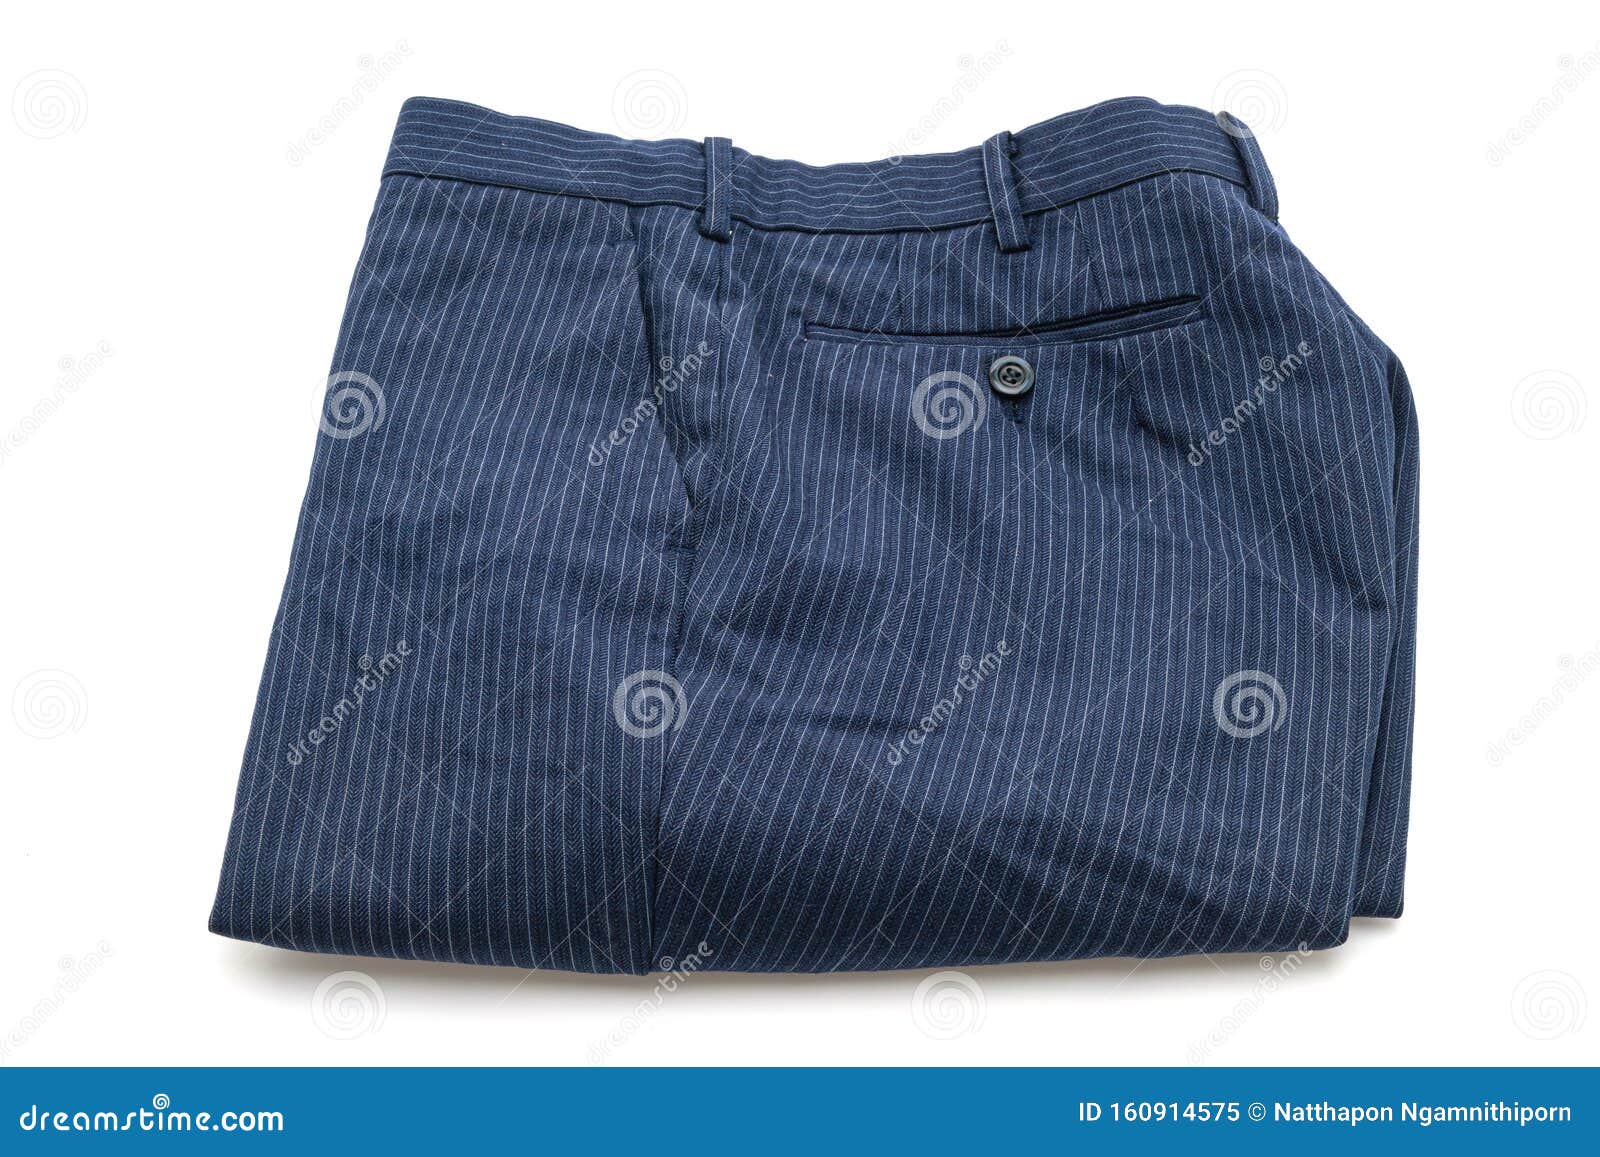 Short Pants on White Background Stock Image - Image of object, apparel ...